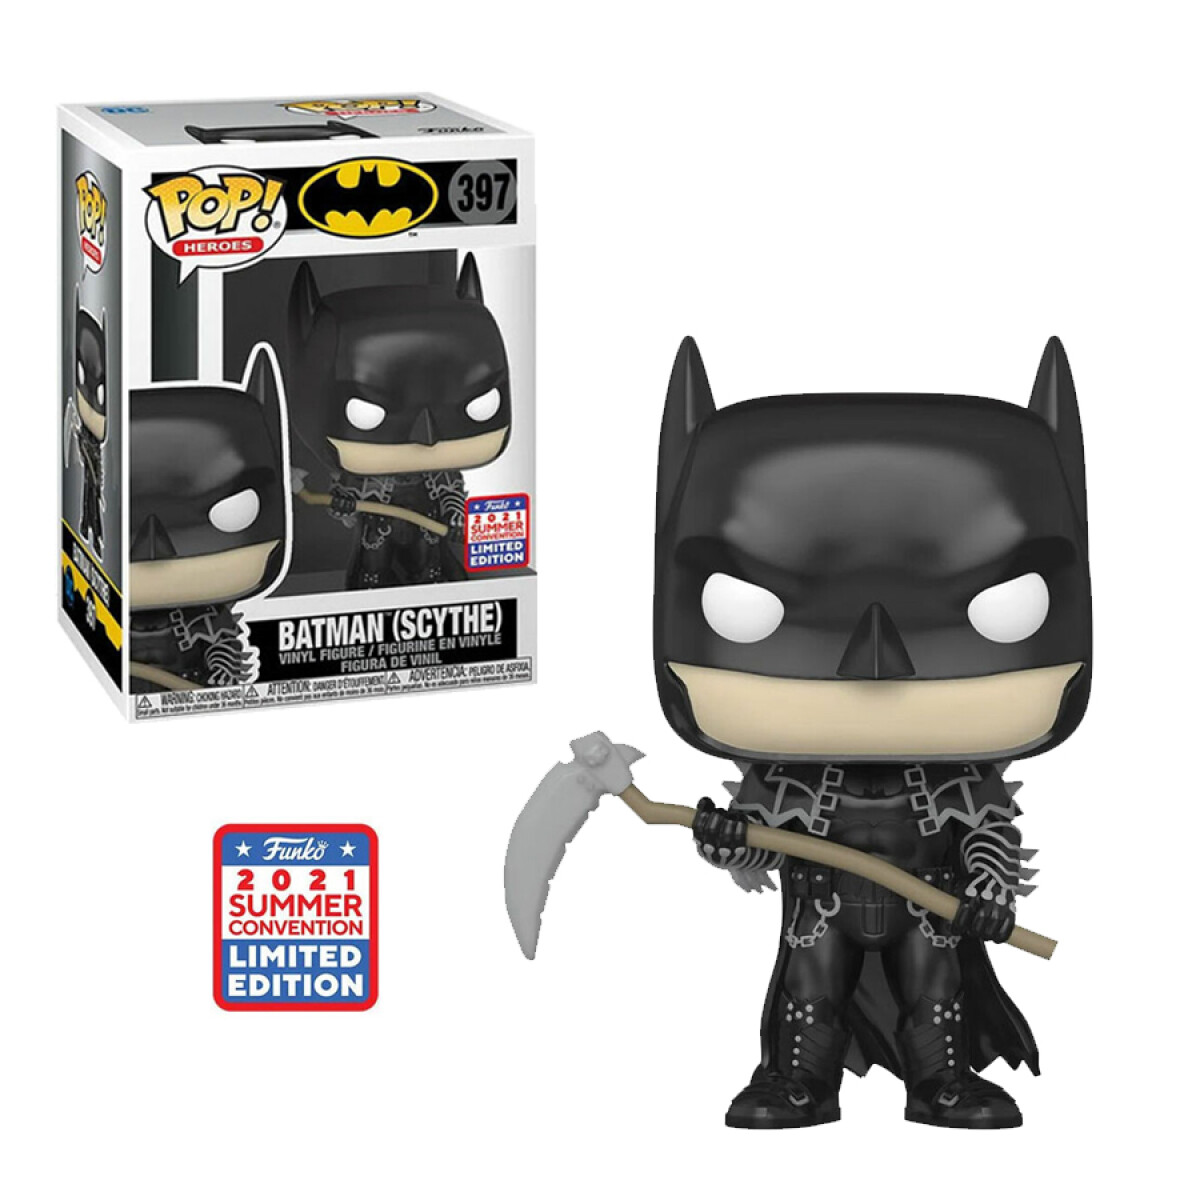 Batman With Scythe · Heroes: DC [Exclusivo · Summer Convention 2021] - 397 